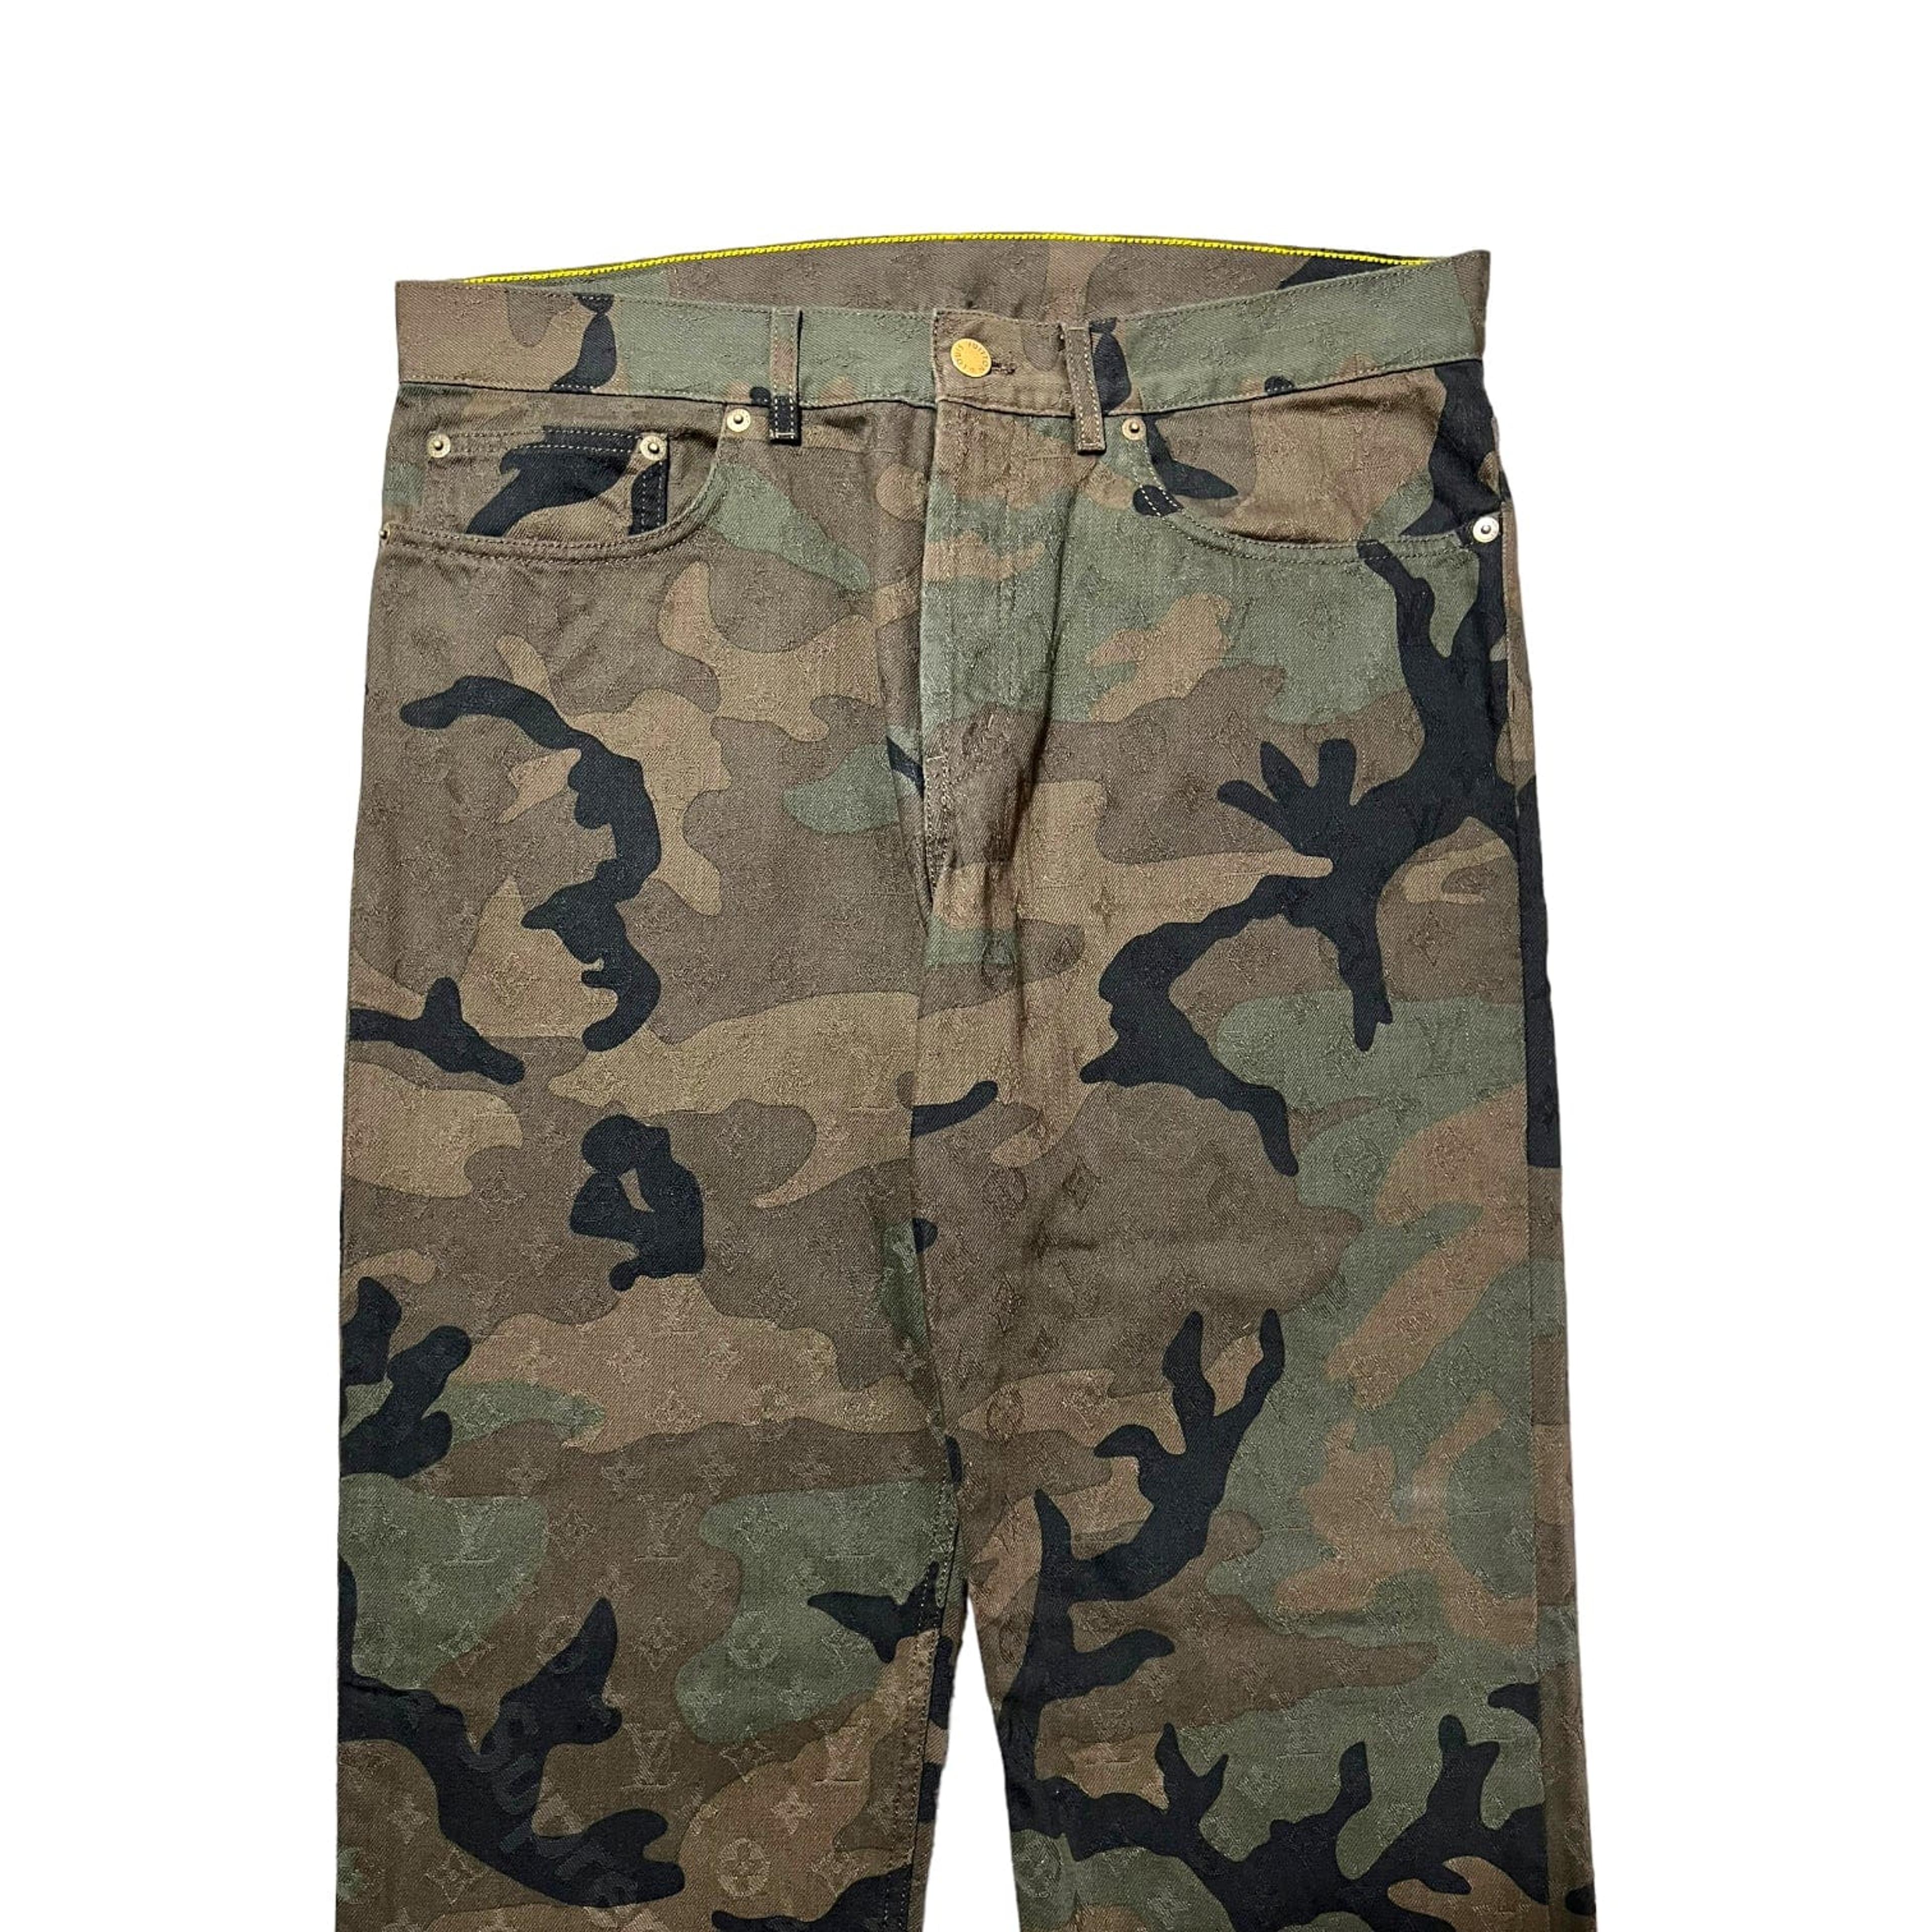 Alternate View 2 of Supreme x Louis Vuitton Jacquard Jeans Camouflage